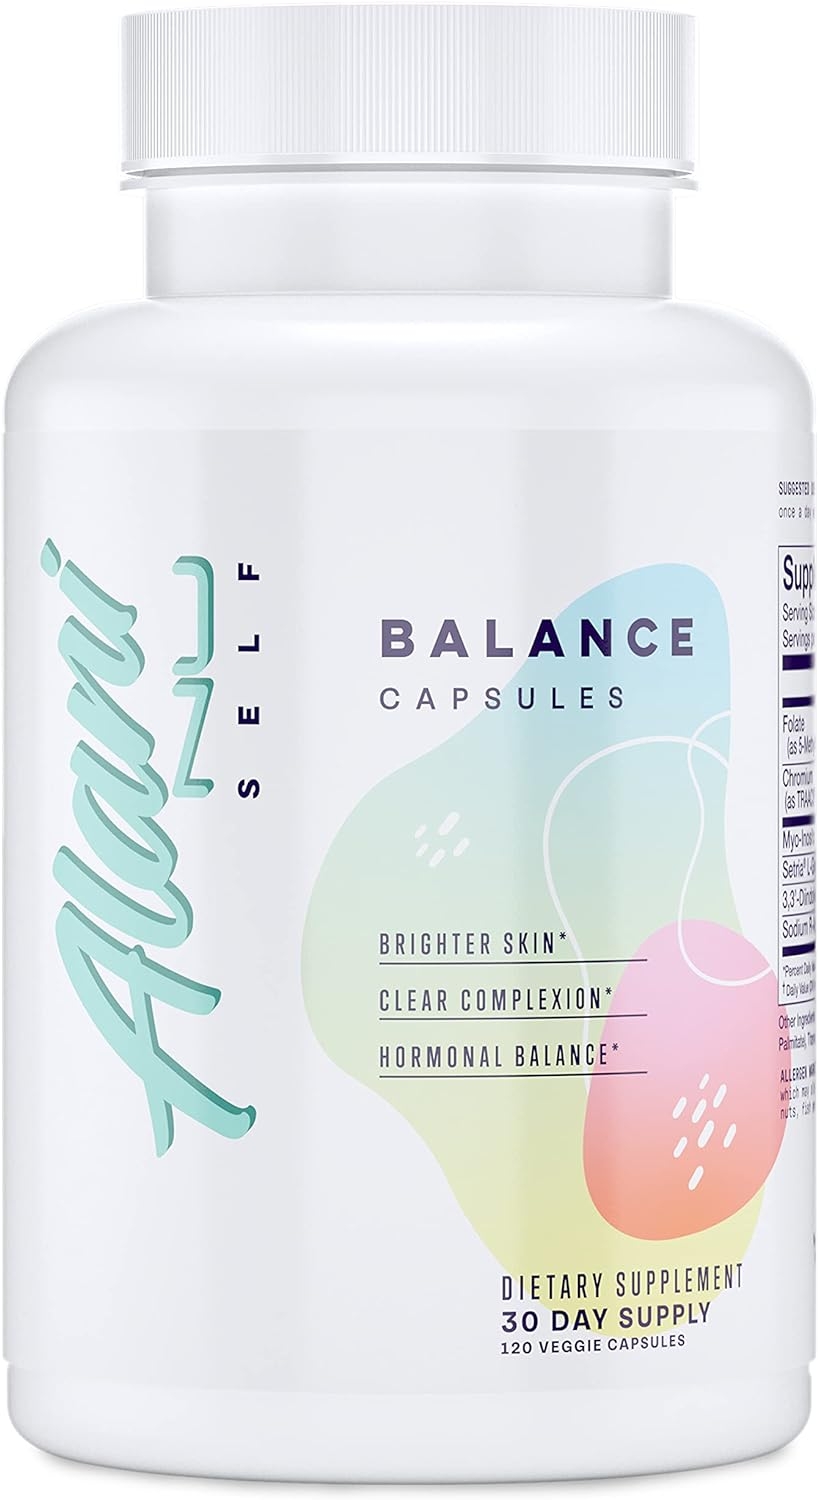 Alani Nu Hormonal Balance Vitamin Supplement for Women, Weight Management and Clear Complexion, 30 Servings (Packaging May Vary)